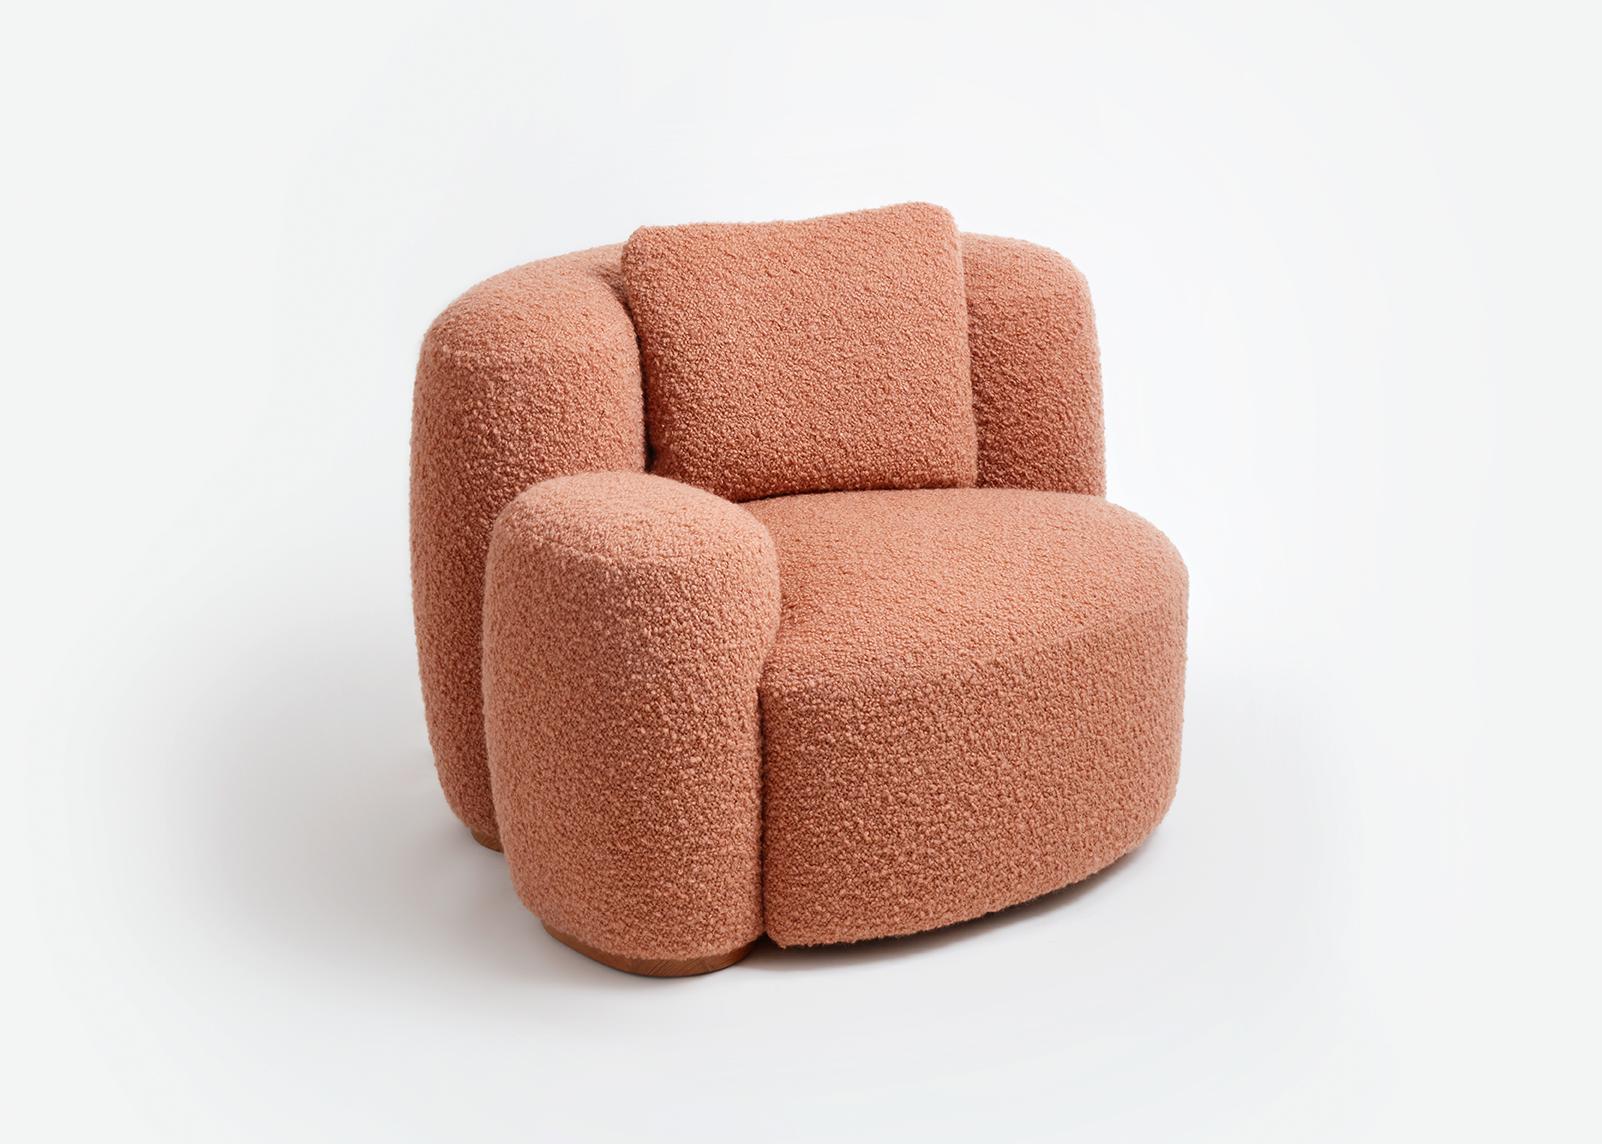 Baba easy chair by Gisbert Pöppler
Dimensions: H 74 (SH43) x W 115 x D 93 cm 
Materials: Upholstered wooden frame, teak footings

Like a friend that wants to cuddle, Baba is an upholstered easy chair for lounging in complete comfort. The